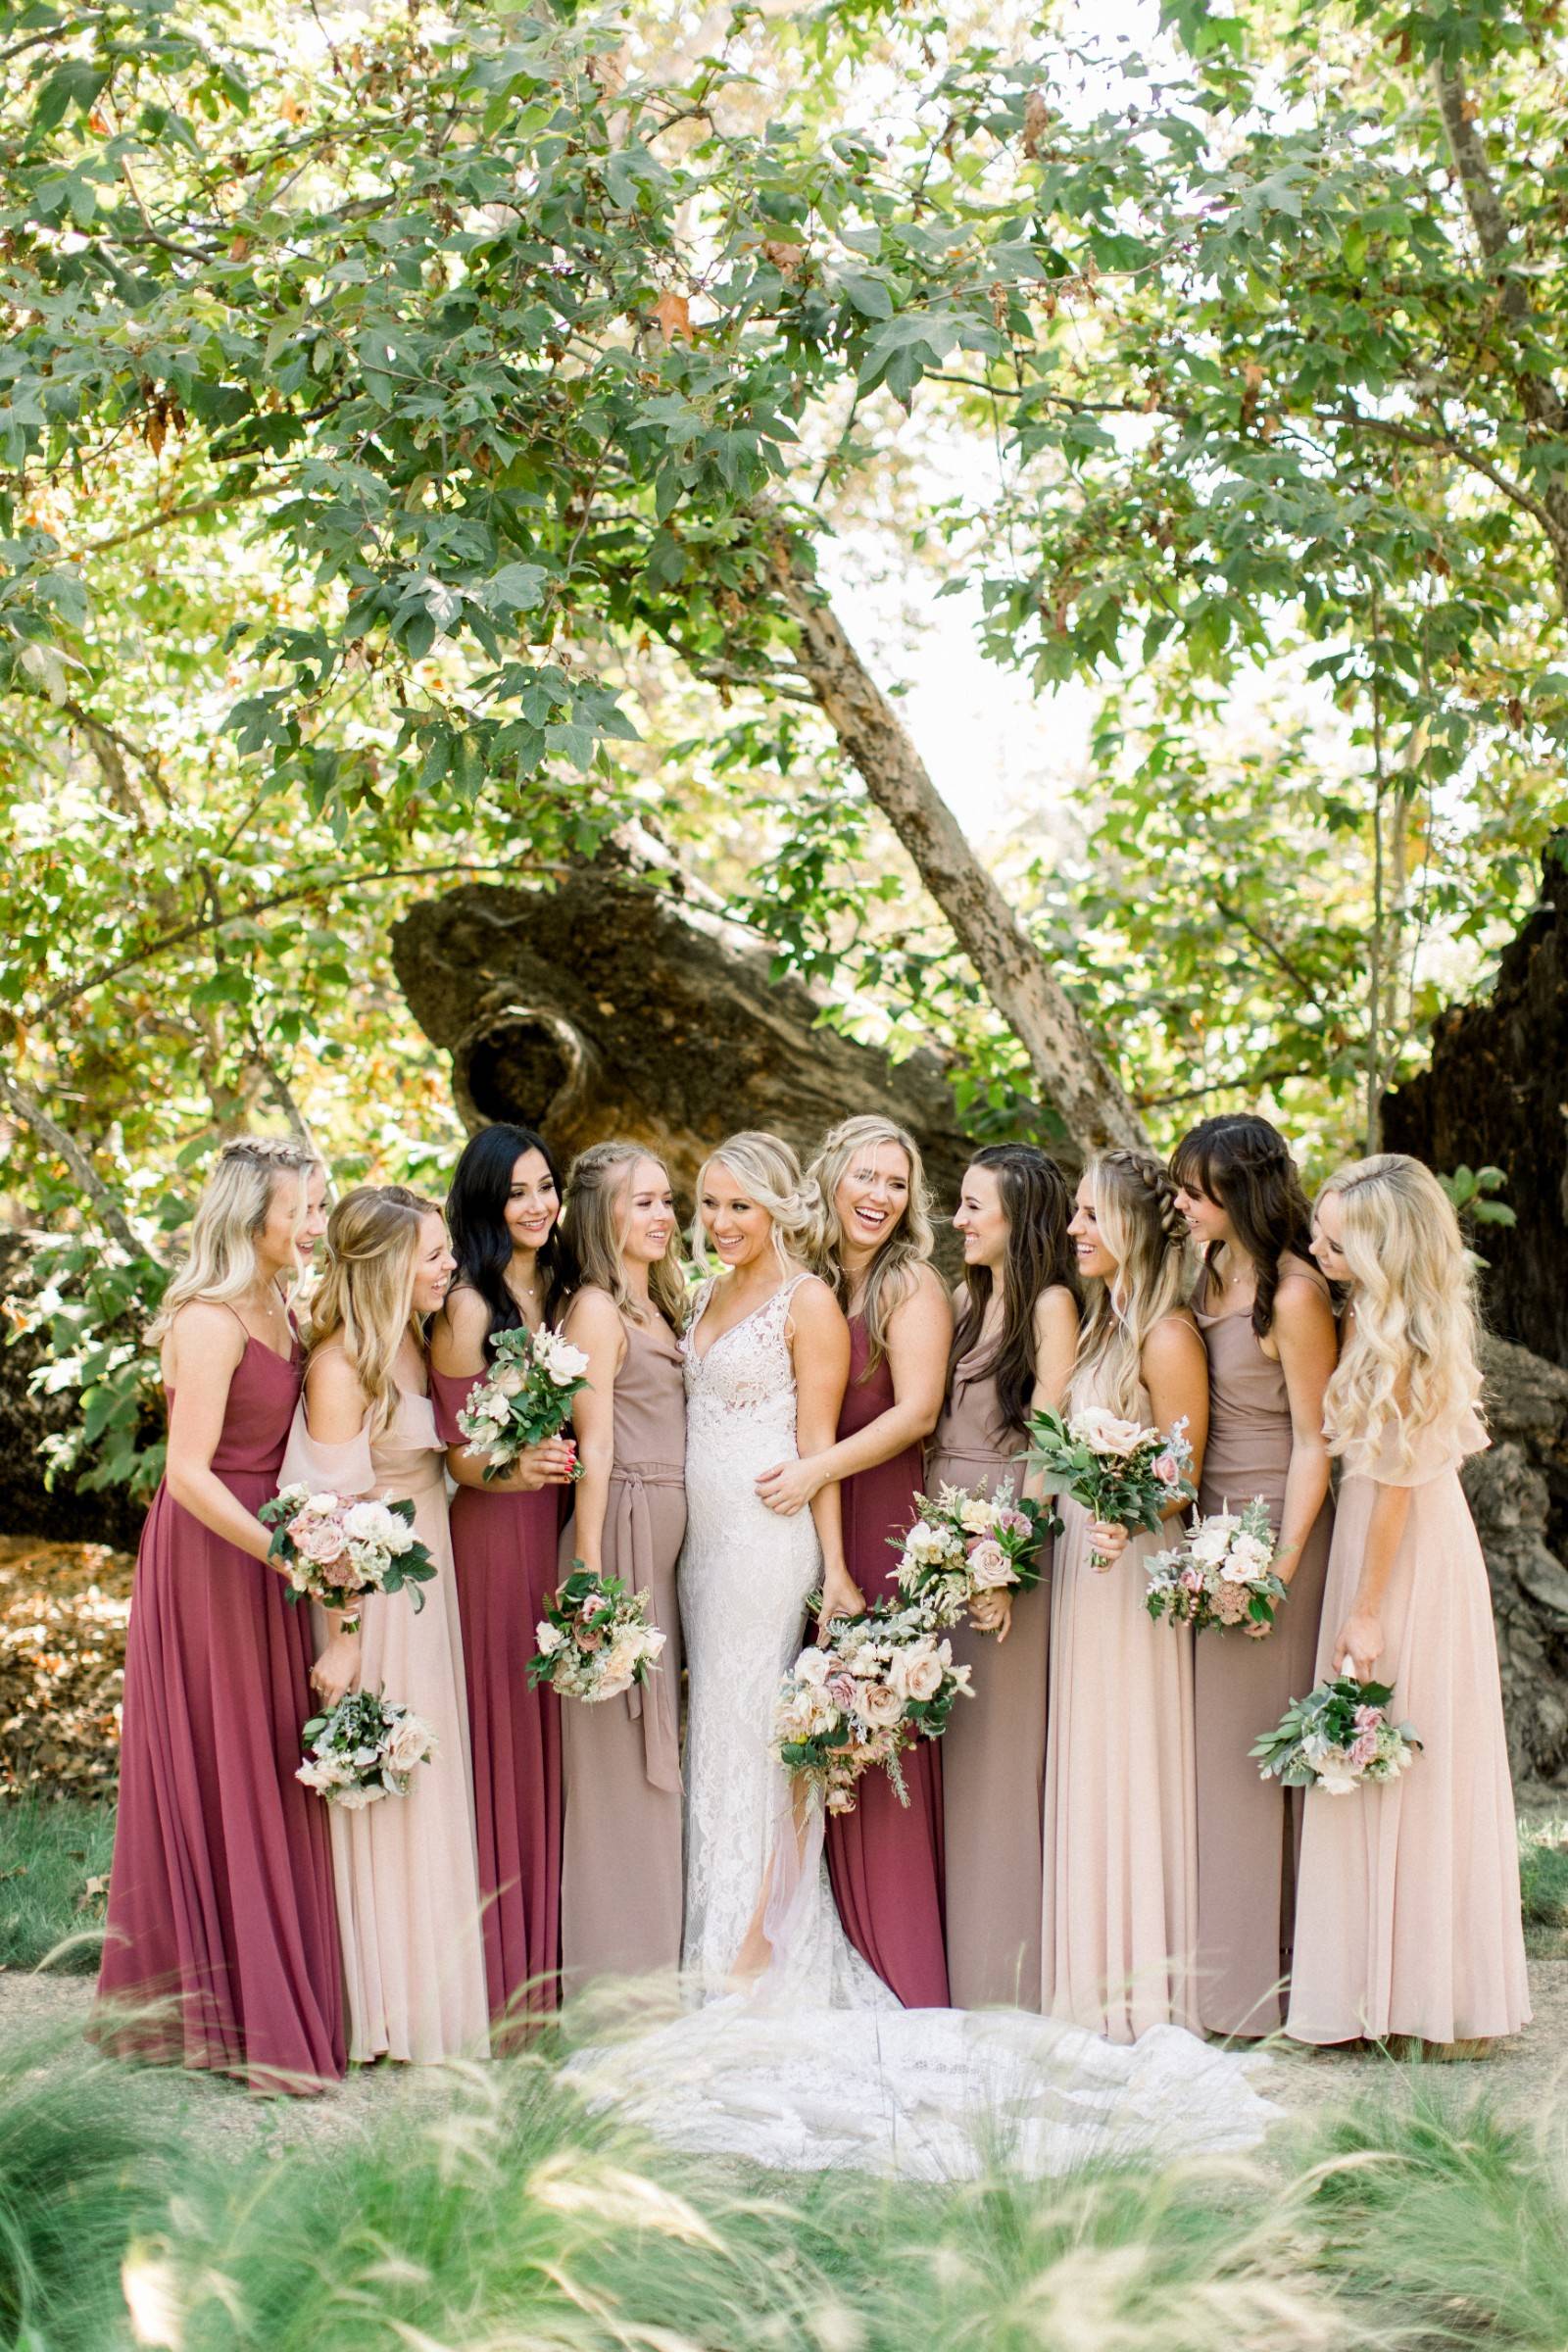 The Guide to Mismatched Bridesmaid Dresses | Bridesmaids | Gallery ...